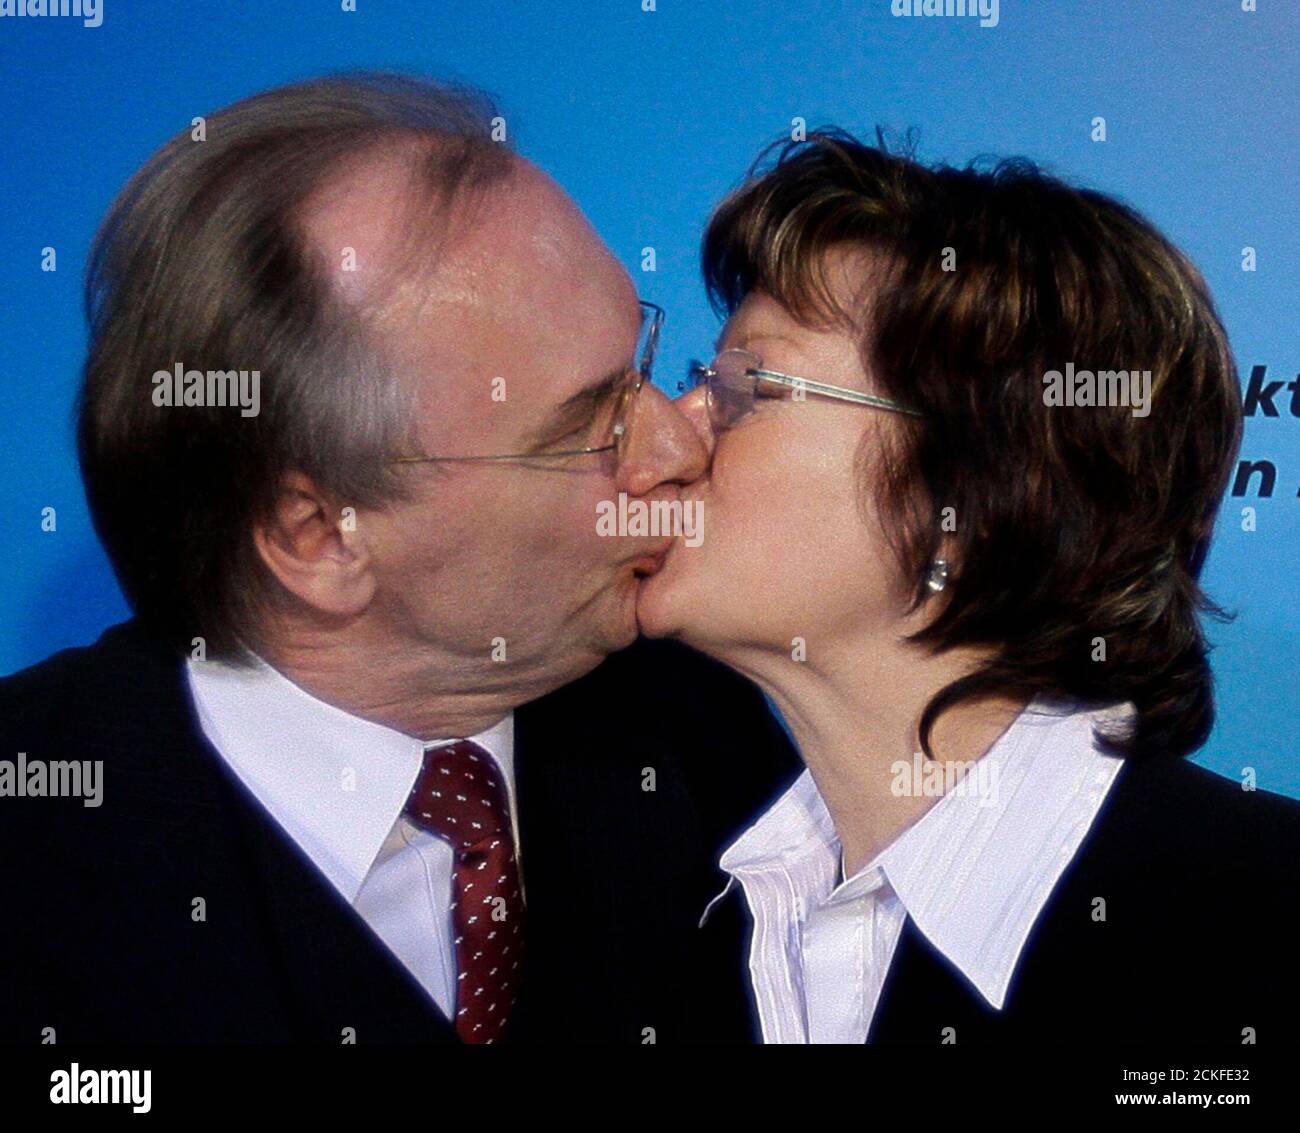 Reiner Haseloff, top candidate  of the Christian Democratic Union (CDU) in Saxony-Anhalt state election, kisses his wife Gabriele in Magdeburg March 20, 2011. German Chancellor Angela Merkel began an electoral stress test on Sunday, with the first of three state polls when she may suffer a major setback despite a nuclear policy U-turn and military opt-out in Libya.     REUTERS/Thomas Peter (GERMANY  - Tags: POLITICS ELECTIONS POLITICS) Stock Photo